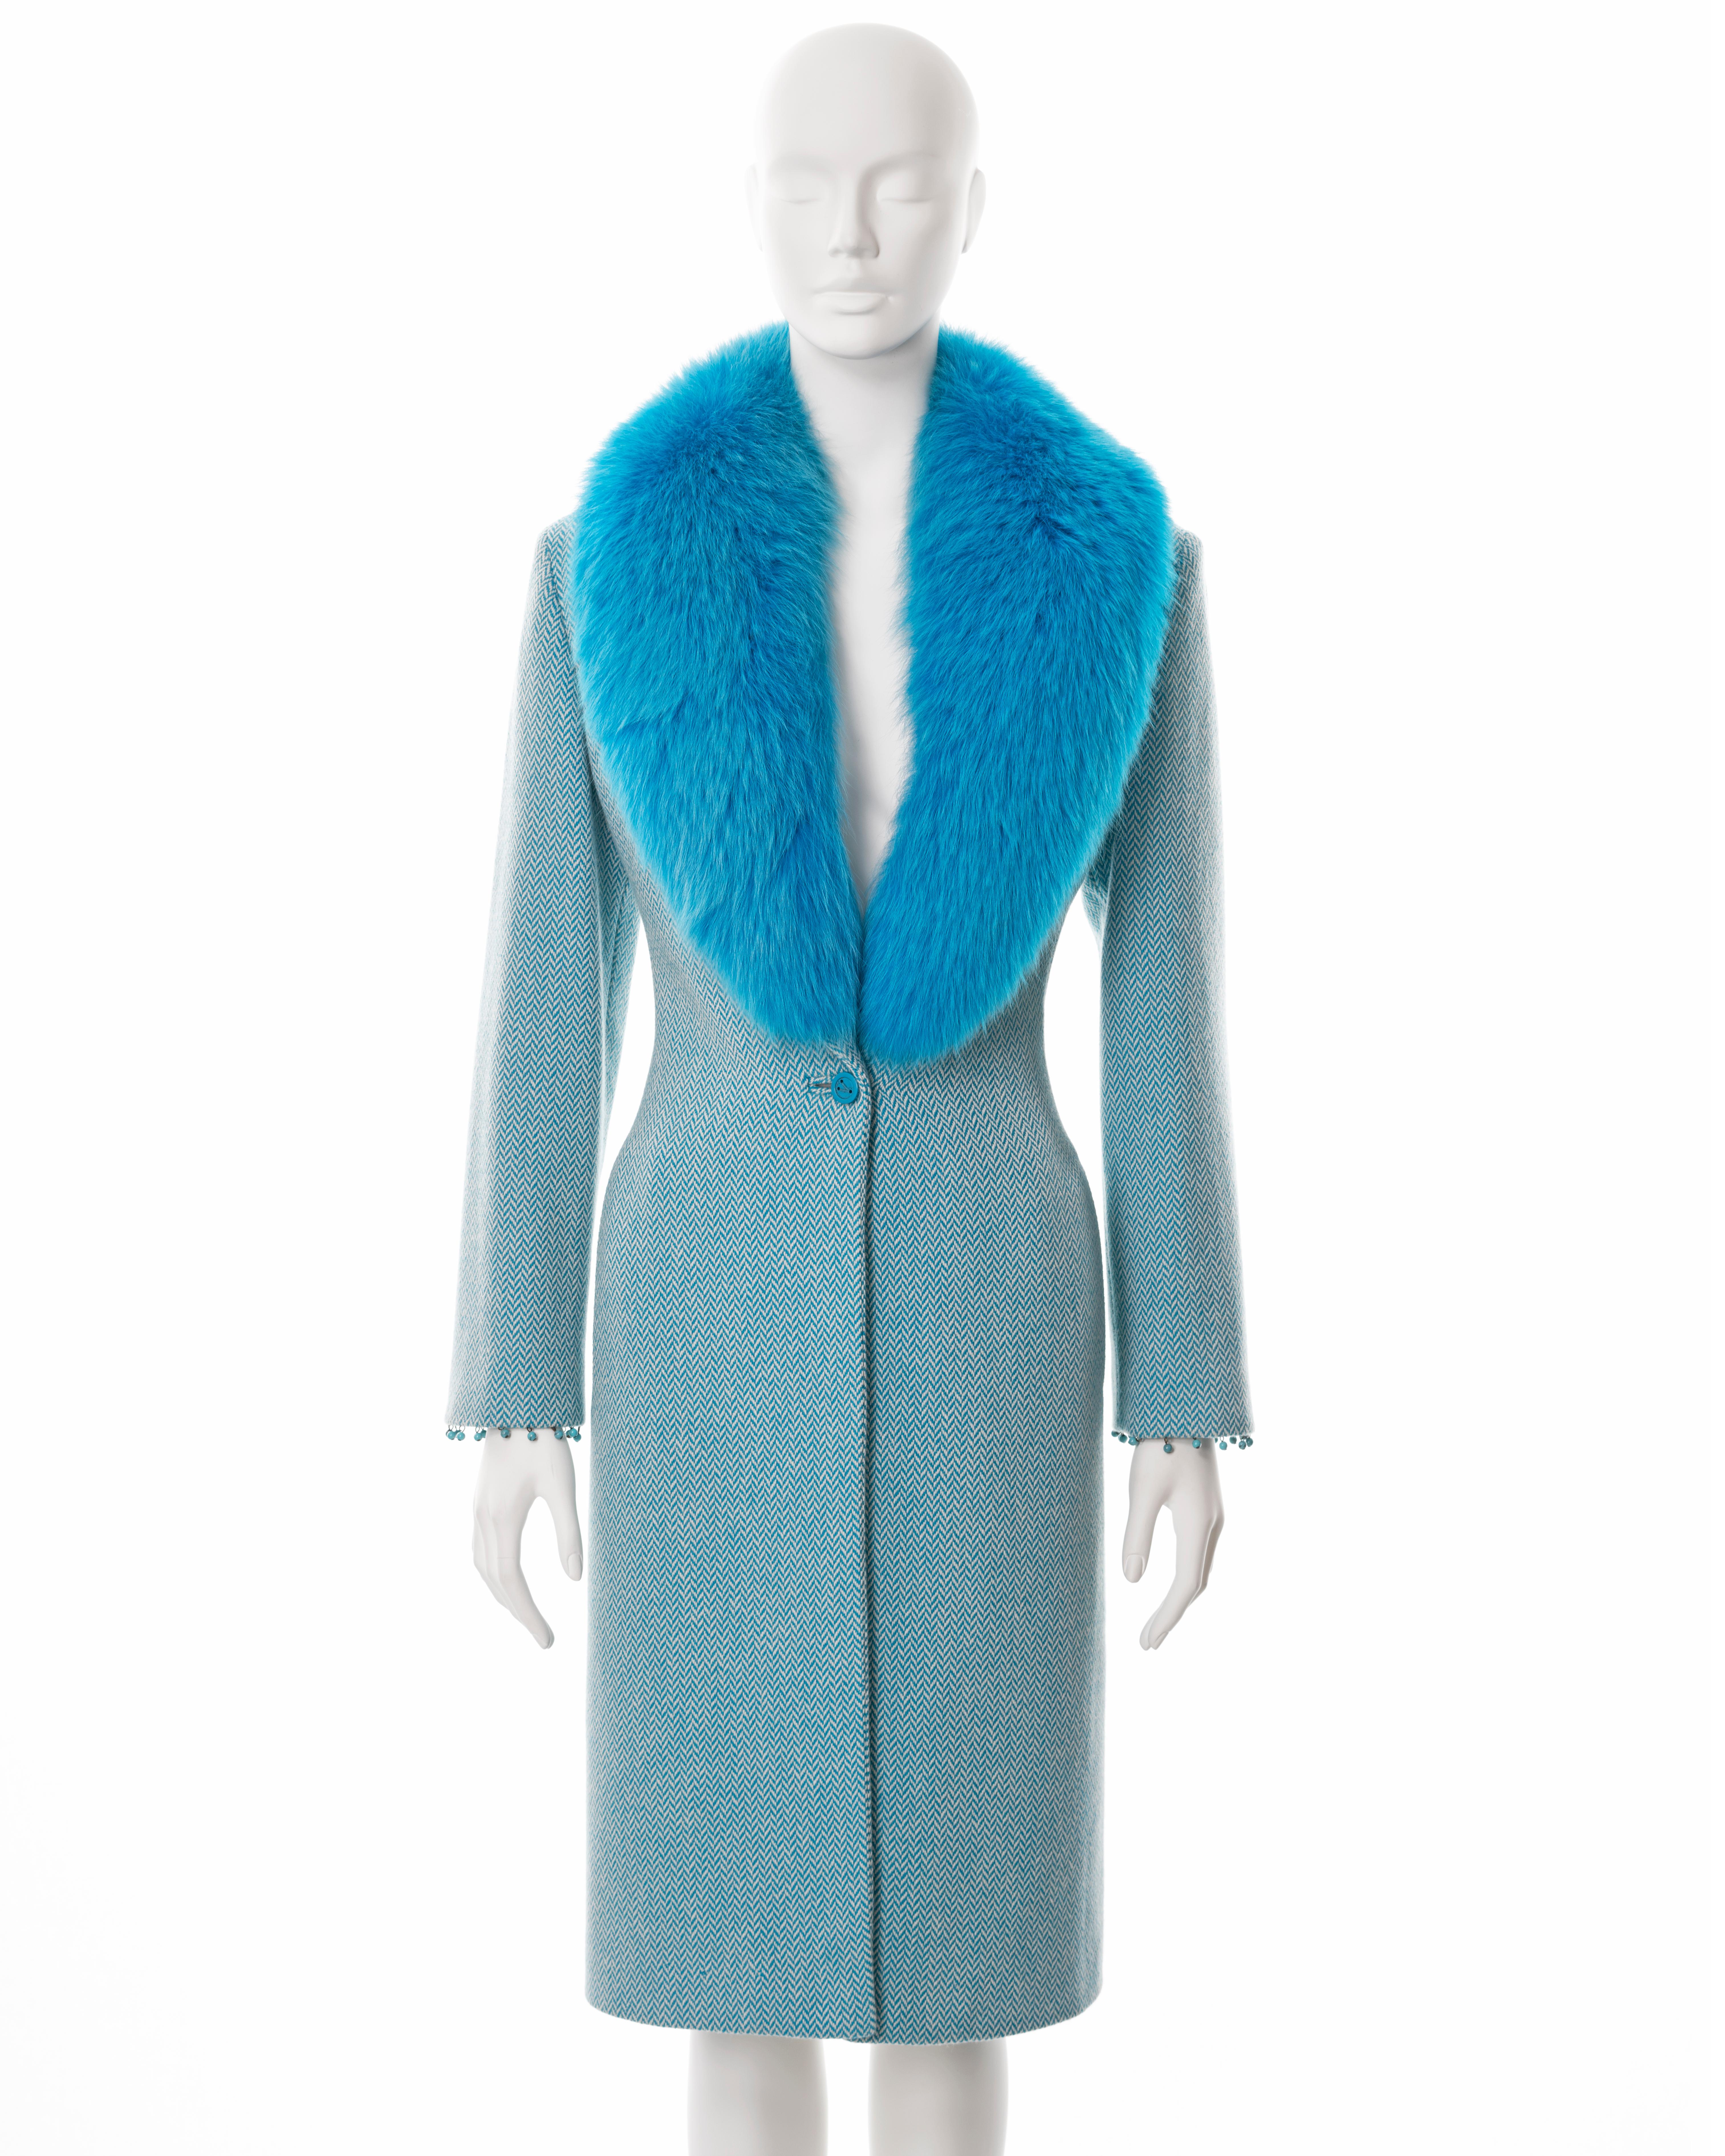 ▪ Gianni Versace tweed coat 
▪ Designed by Donatella Versace
▪ Sold by One of a Kind Archive
▪ Fall-Winter 1999
▪ Constructed from blue and white herringbone cashmere-wool tweed 
▪ Detachable blue fox fur collar 
▪ Turquoise bead tassel trim on